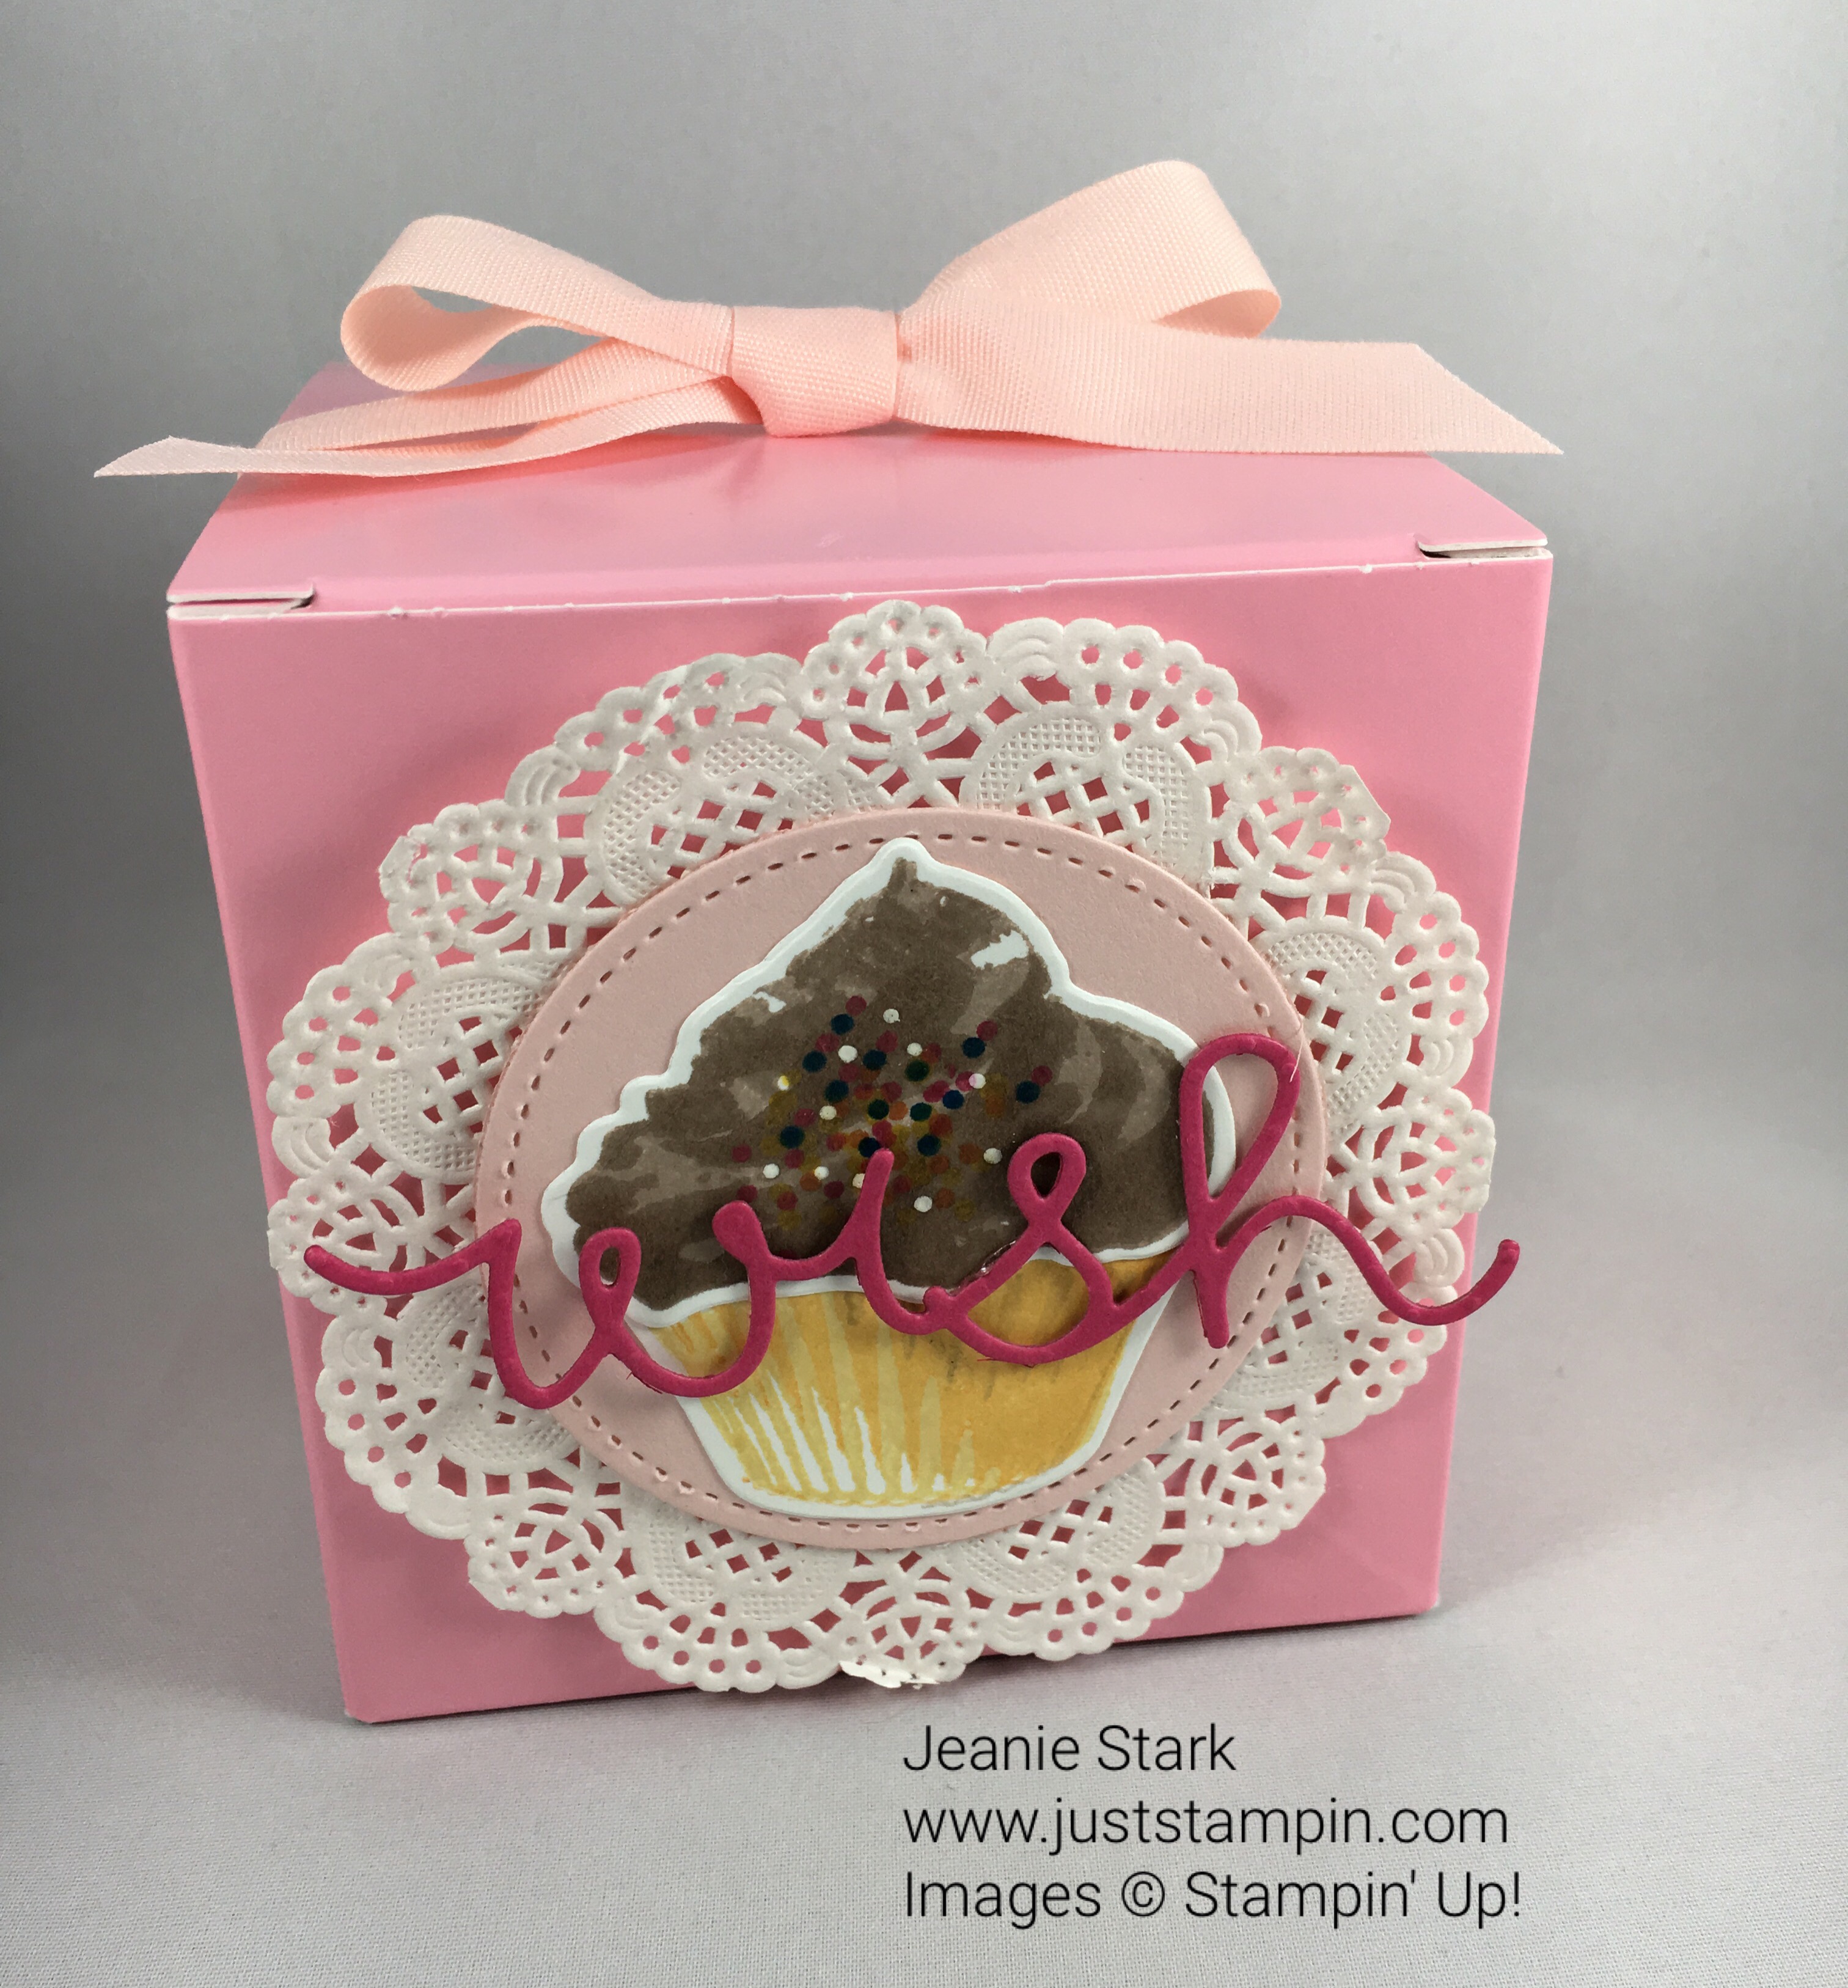 Stampin Up Sweet Cupcake Stamp Set and coordinating Cupcake Cutouts Framelits were used to decorate this cupcake box. For ideas and Stampin' Up! supplies visit www.juststampin.com